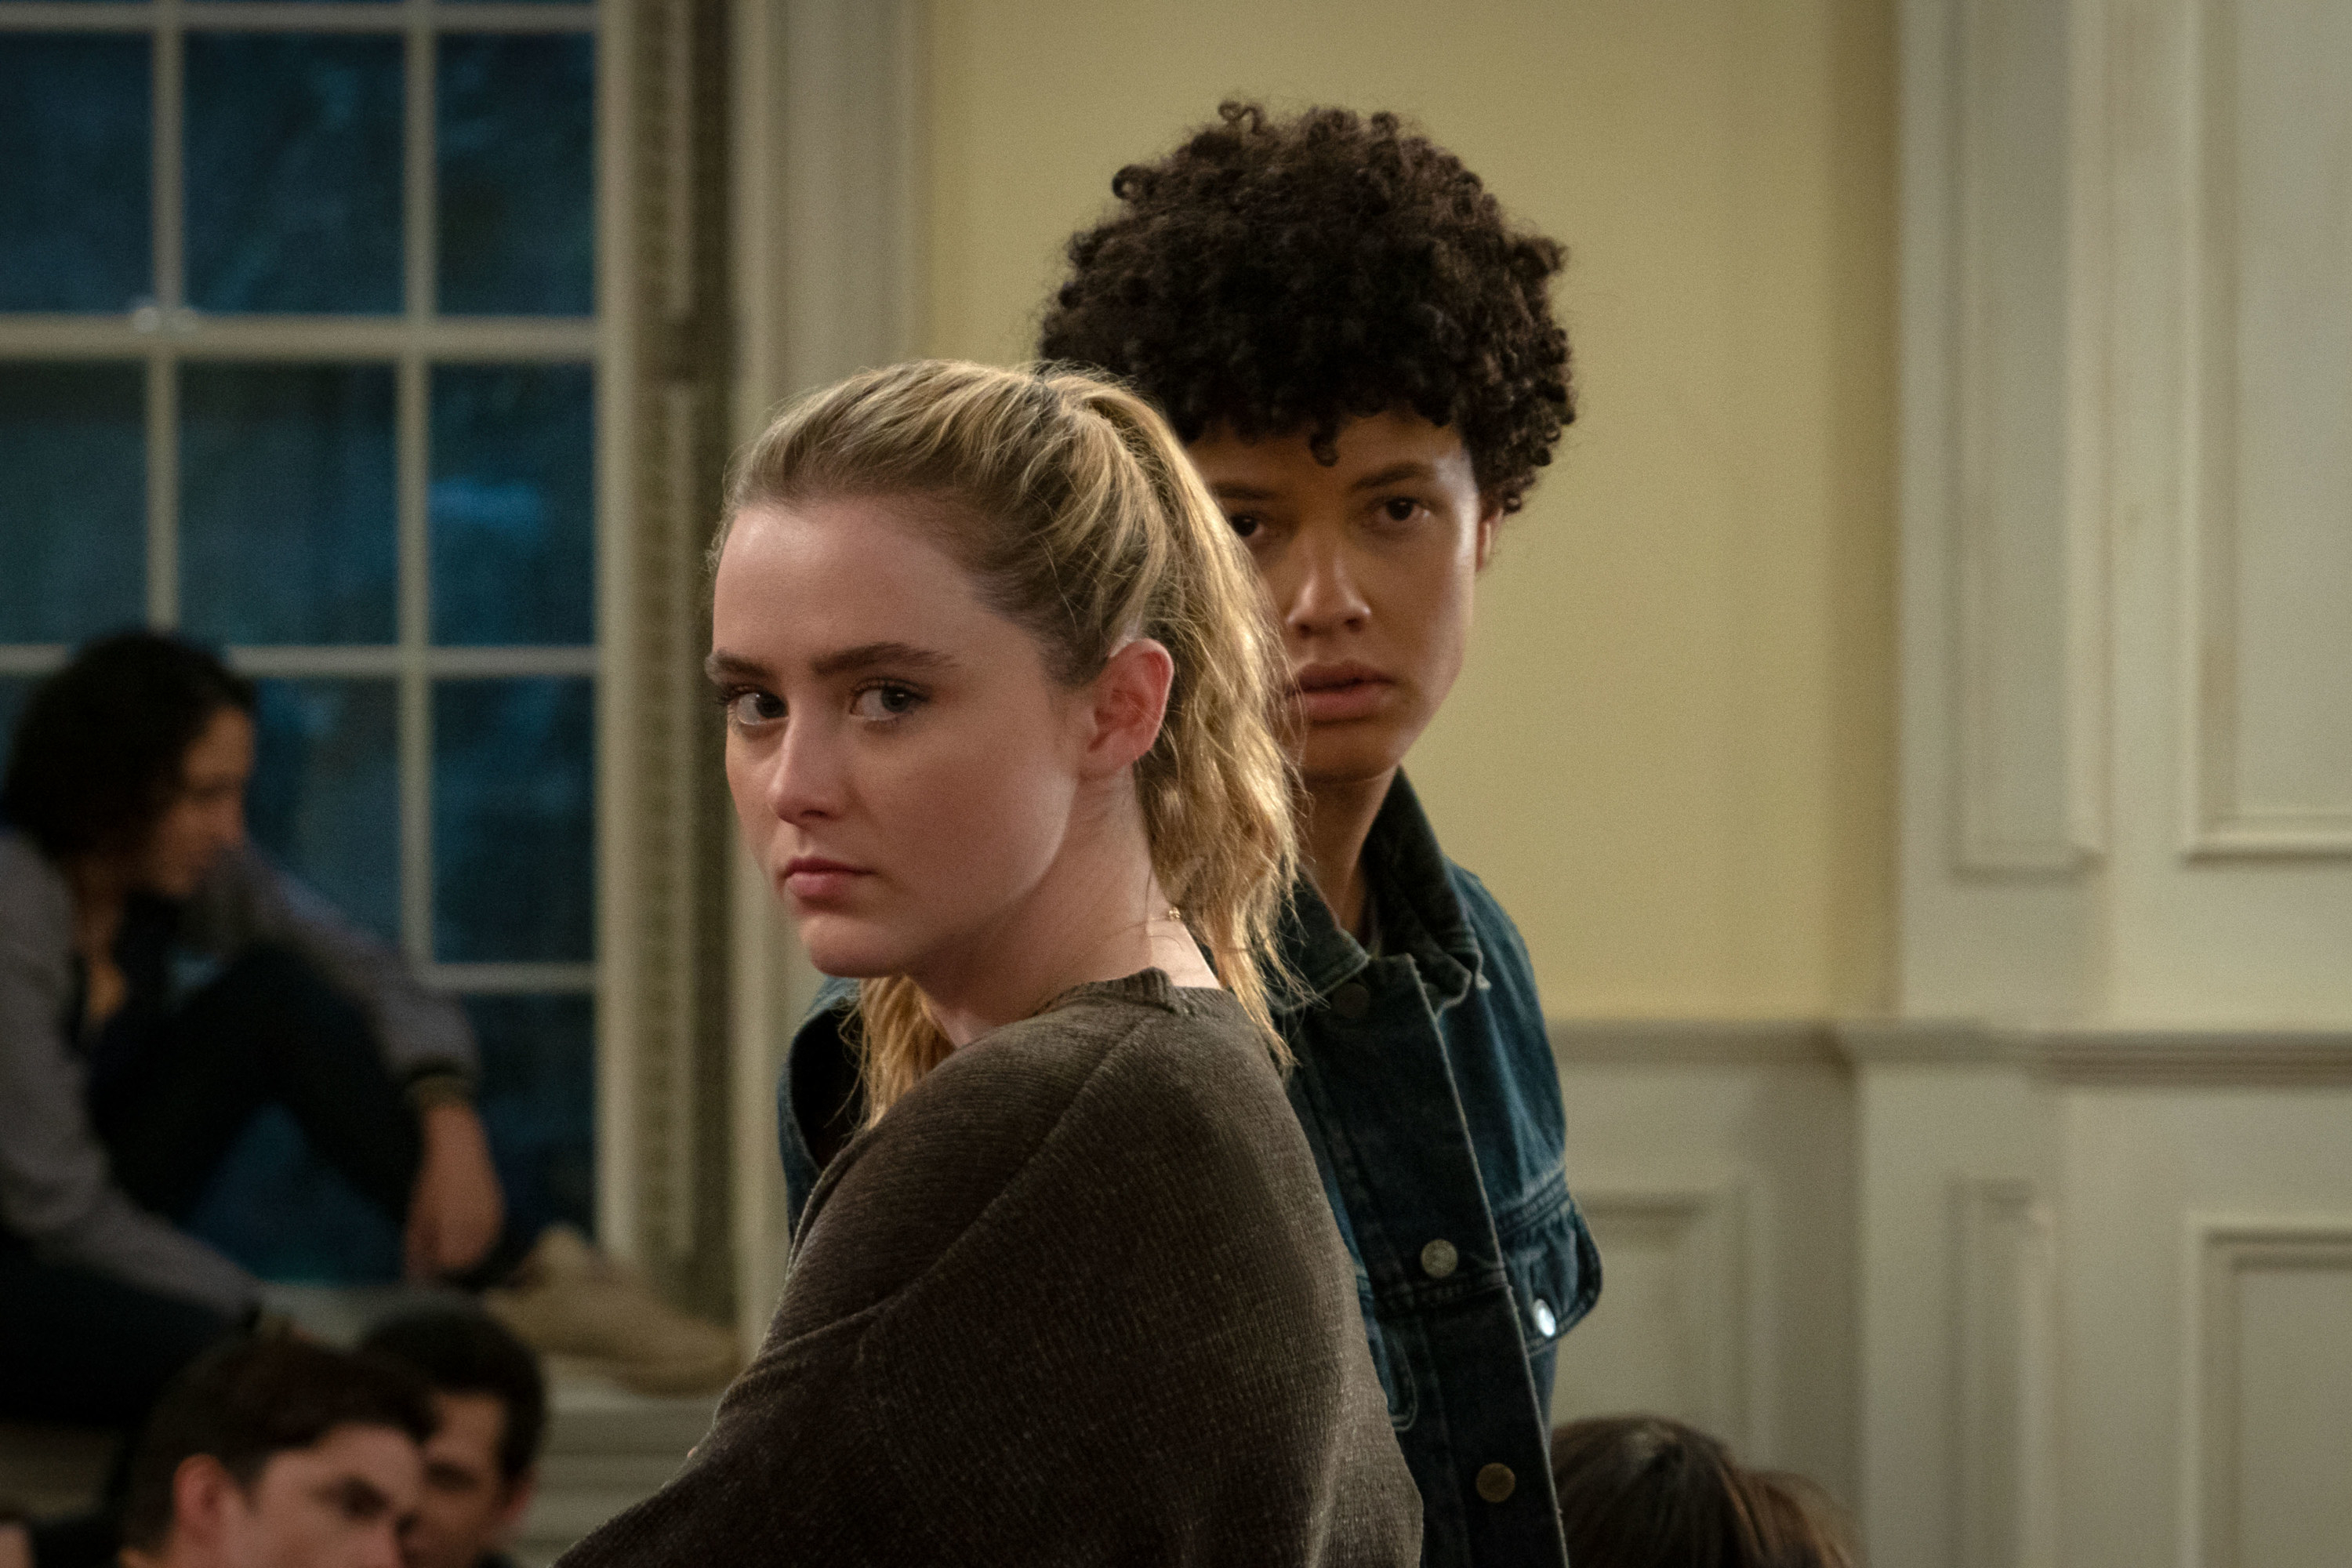 Allie from &quot;The Society&quot; looks serious at the camera